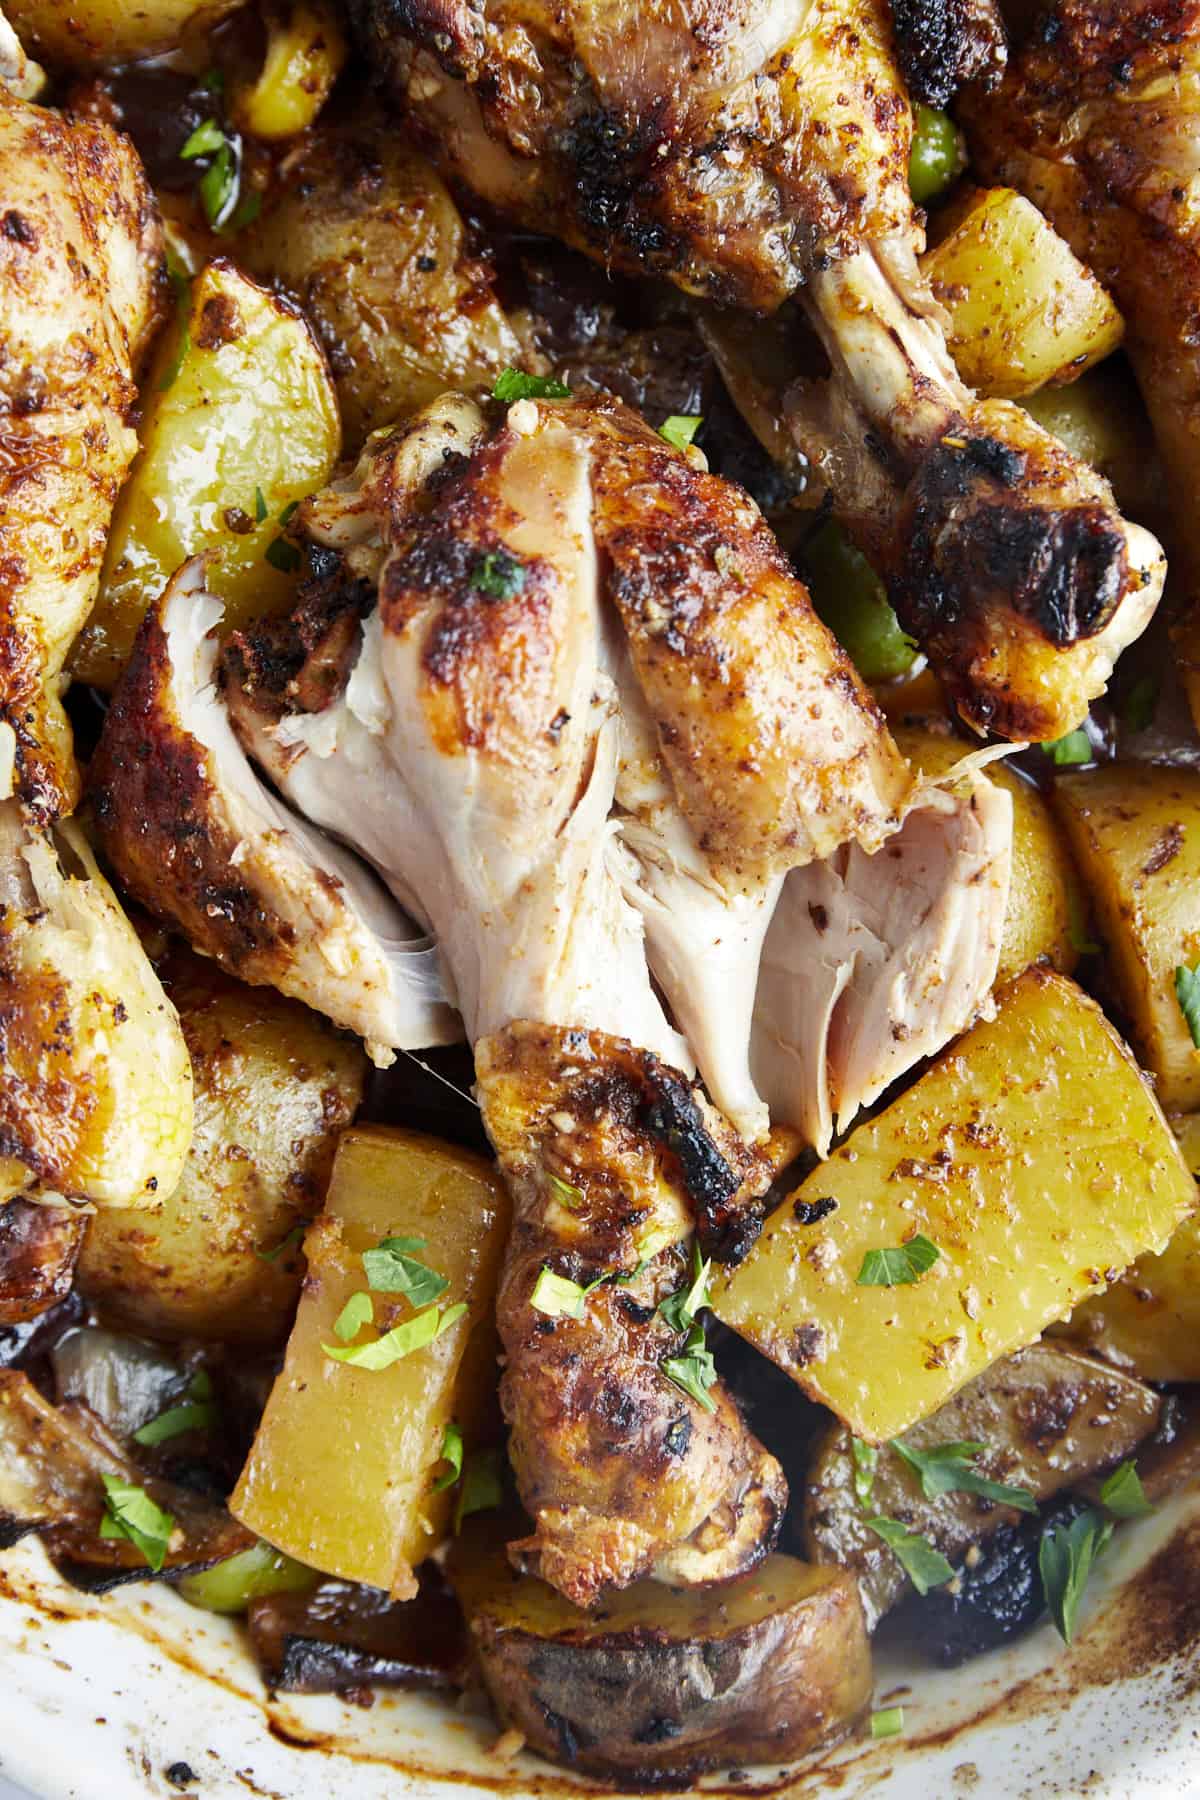 Oven baked chicken drumsticks with potatoes exposing the meat.  